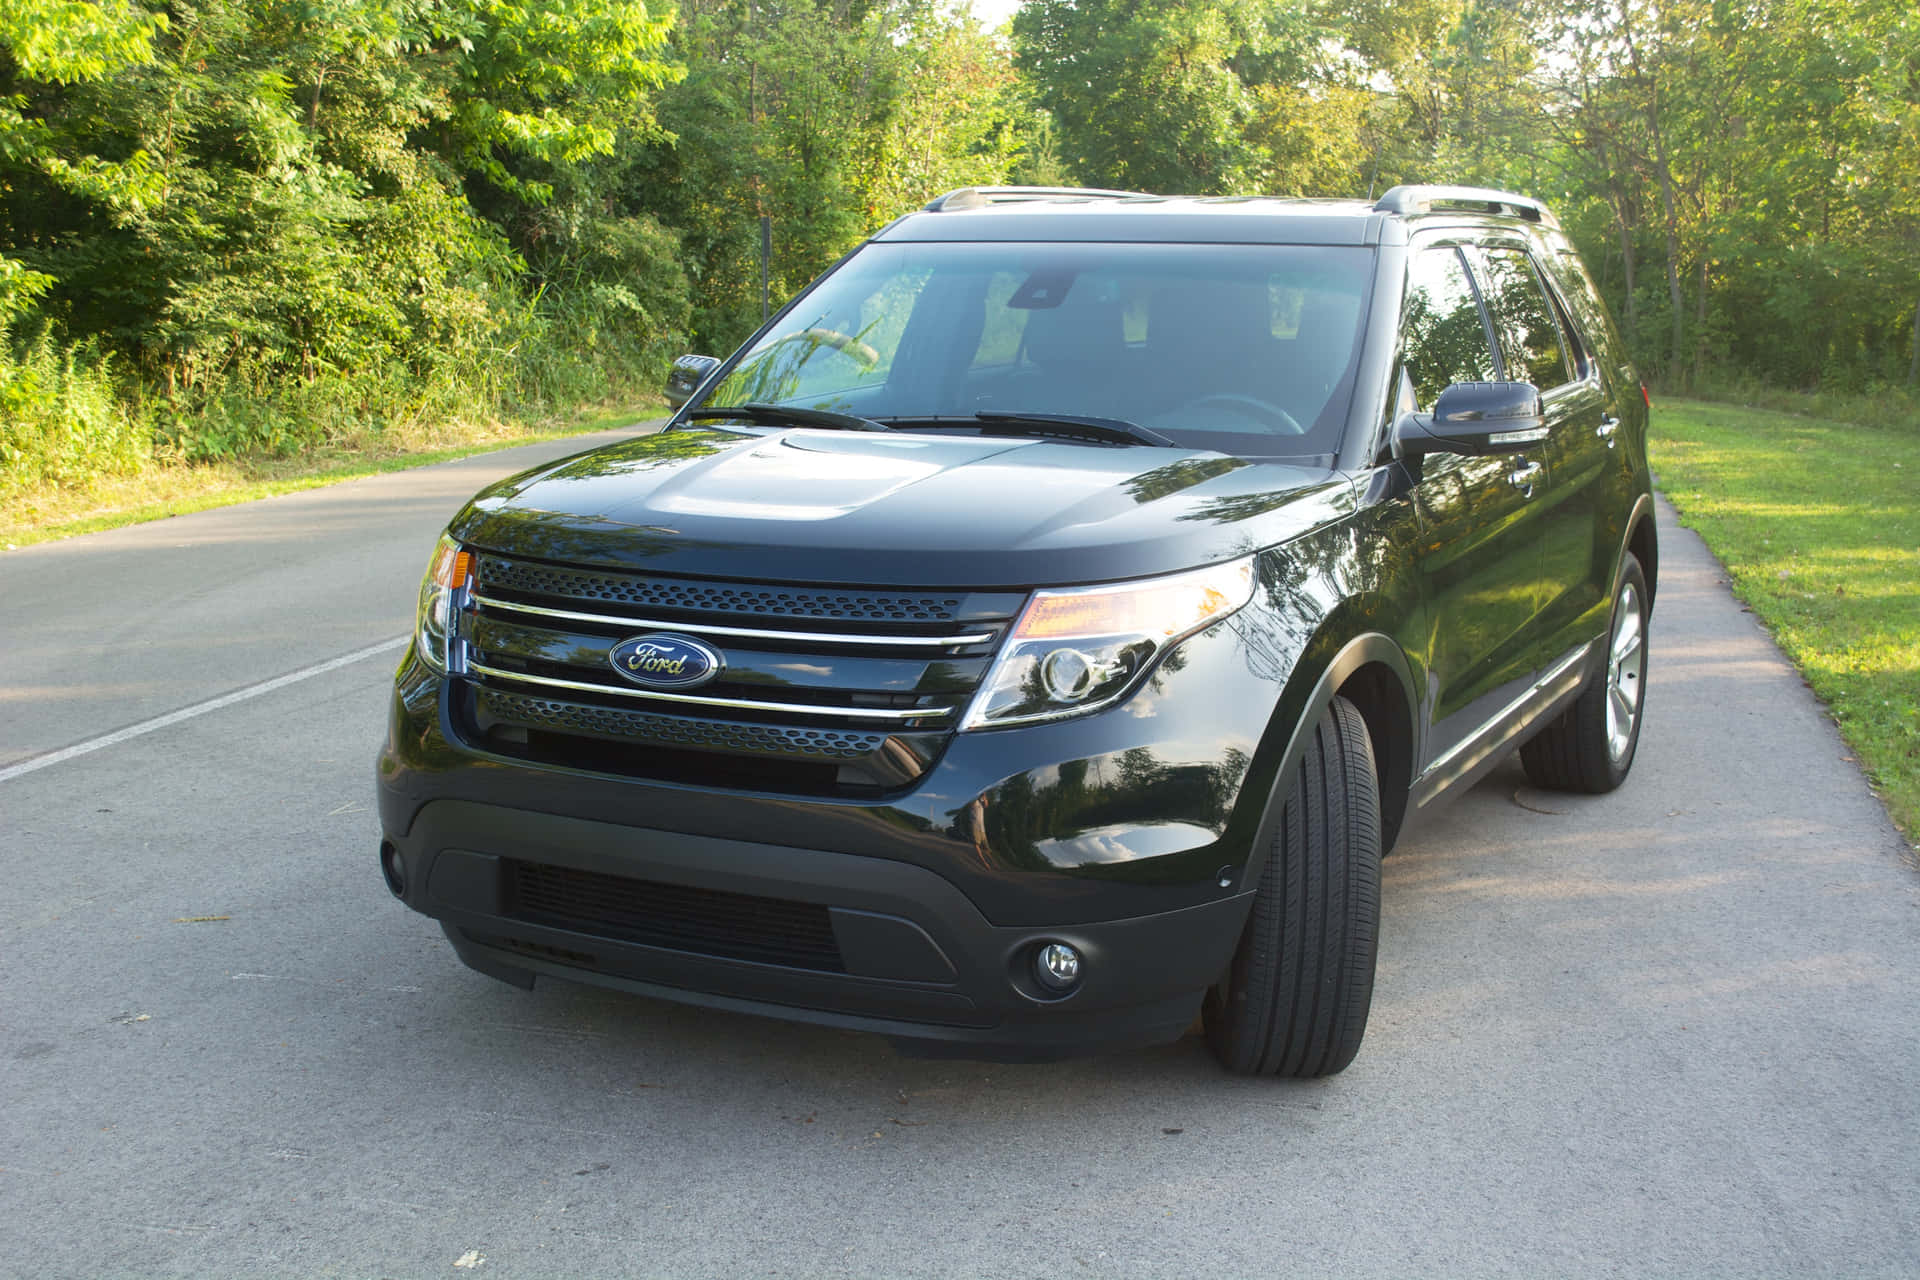 Stunning Ford Explorer on a Scenic Road Wallpaper